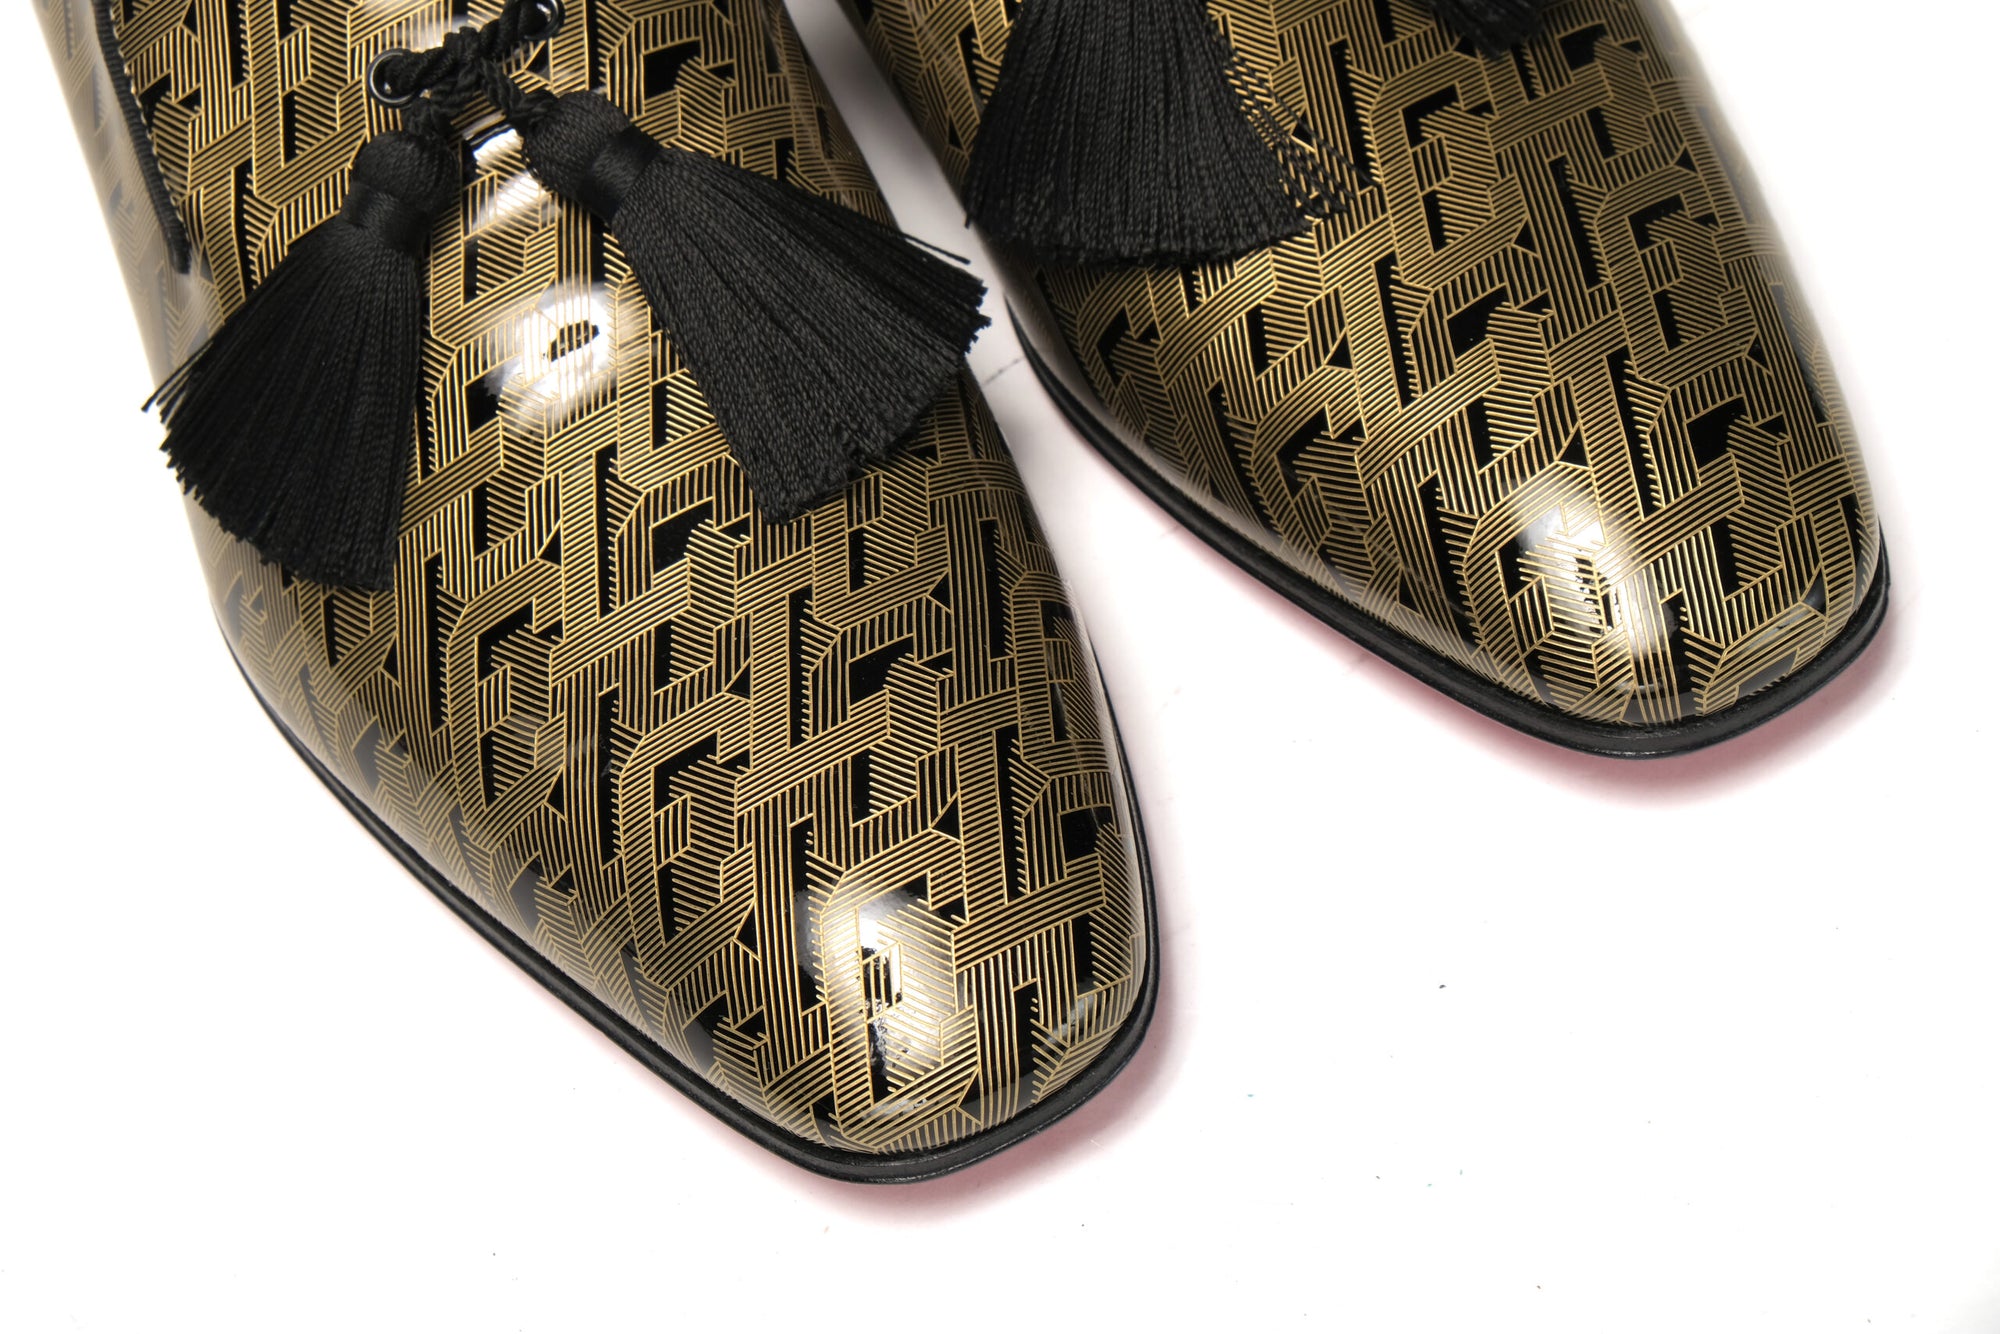 Black/Gold Officialito Flat Shoes